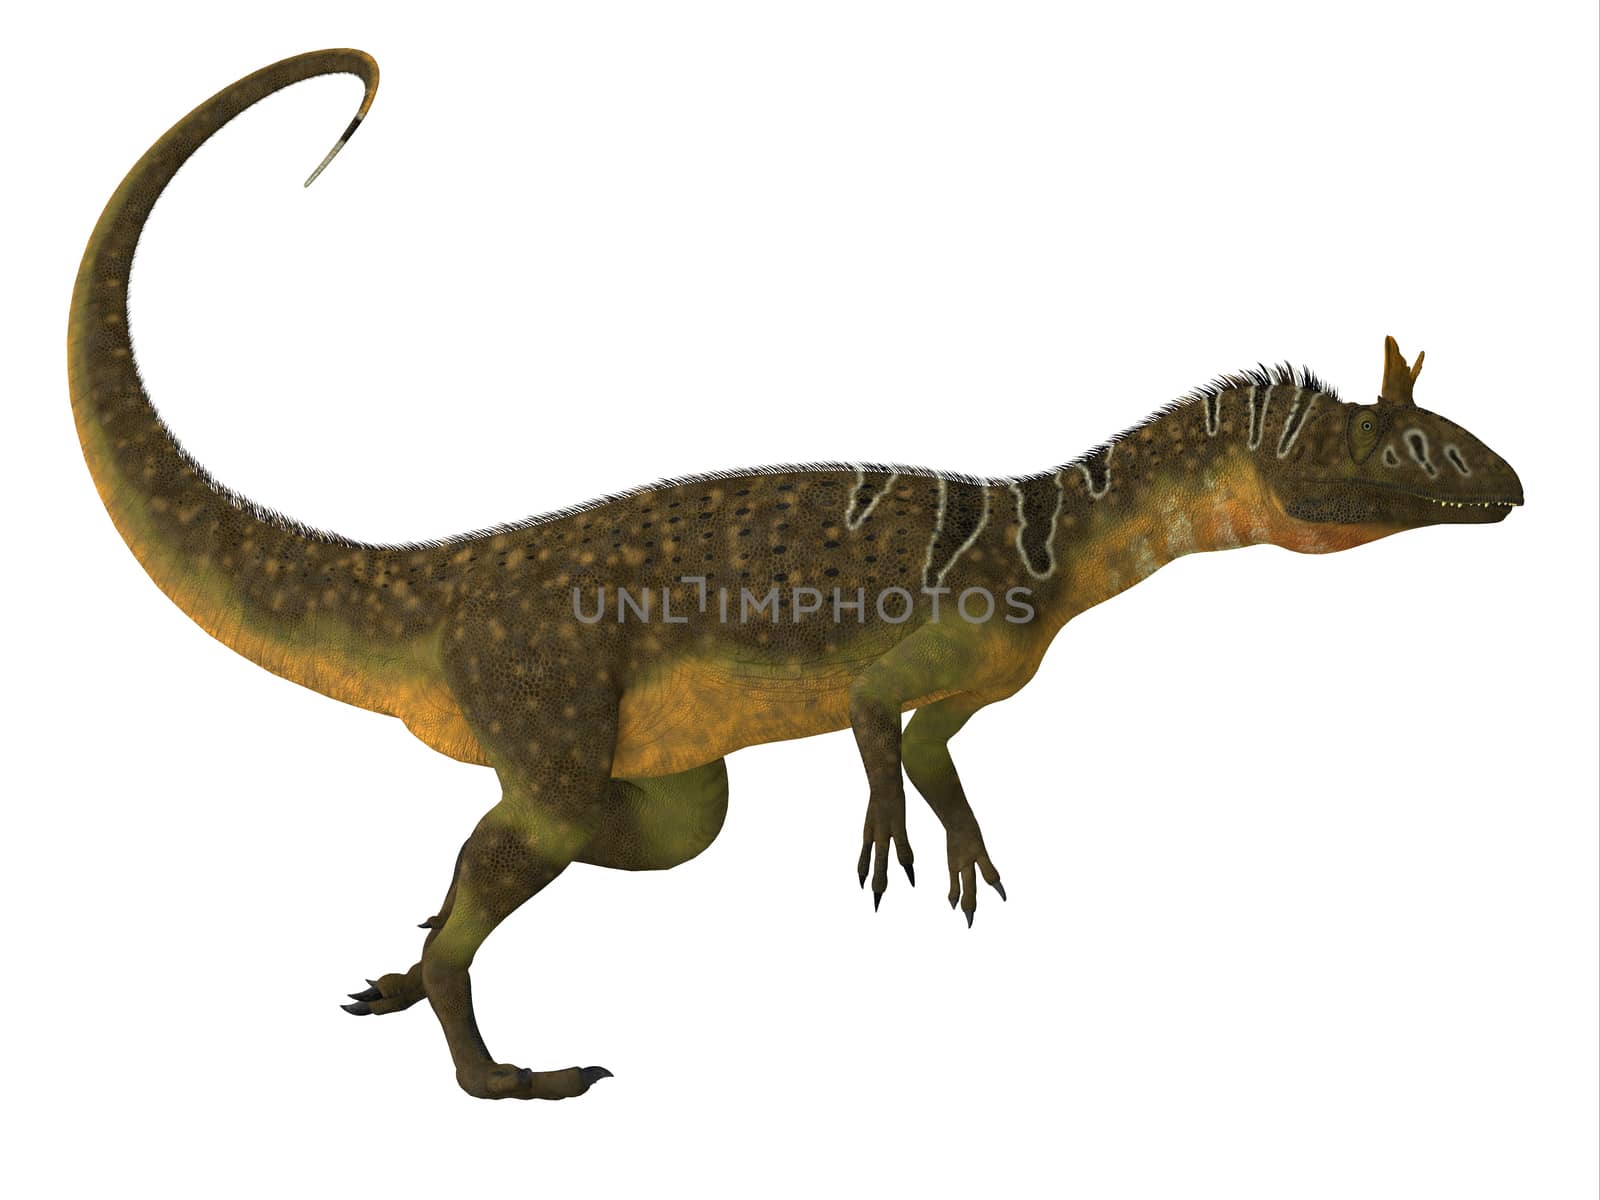 Cryolophosaurus was a large theropod carnivorous dinosaur that lived in Antarctica during the Jurassic Period.